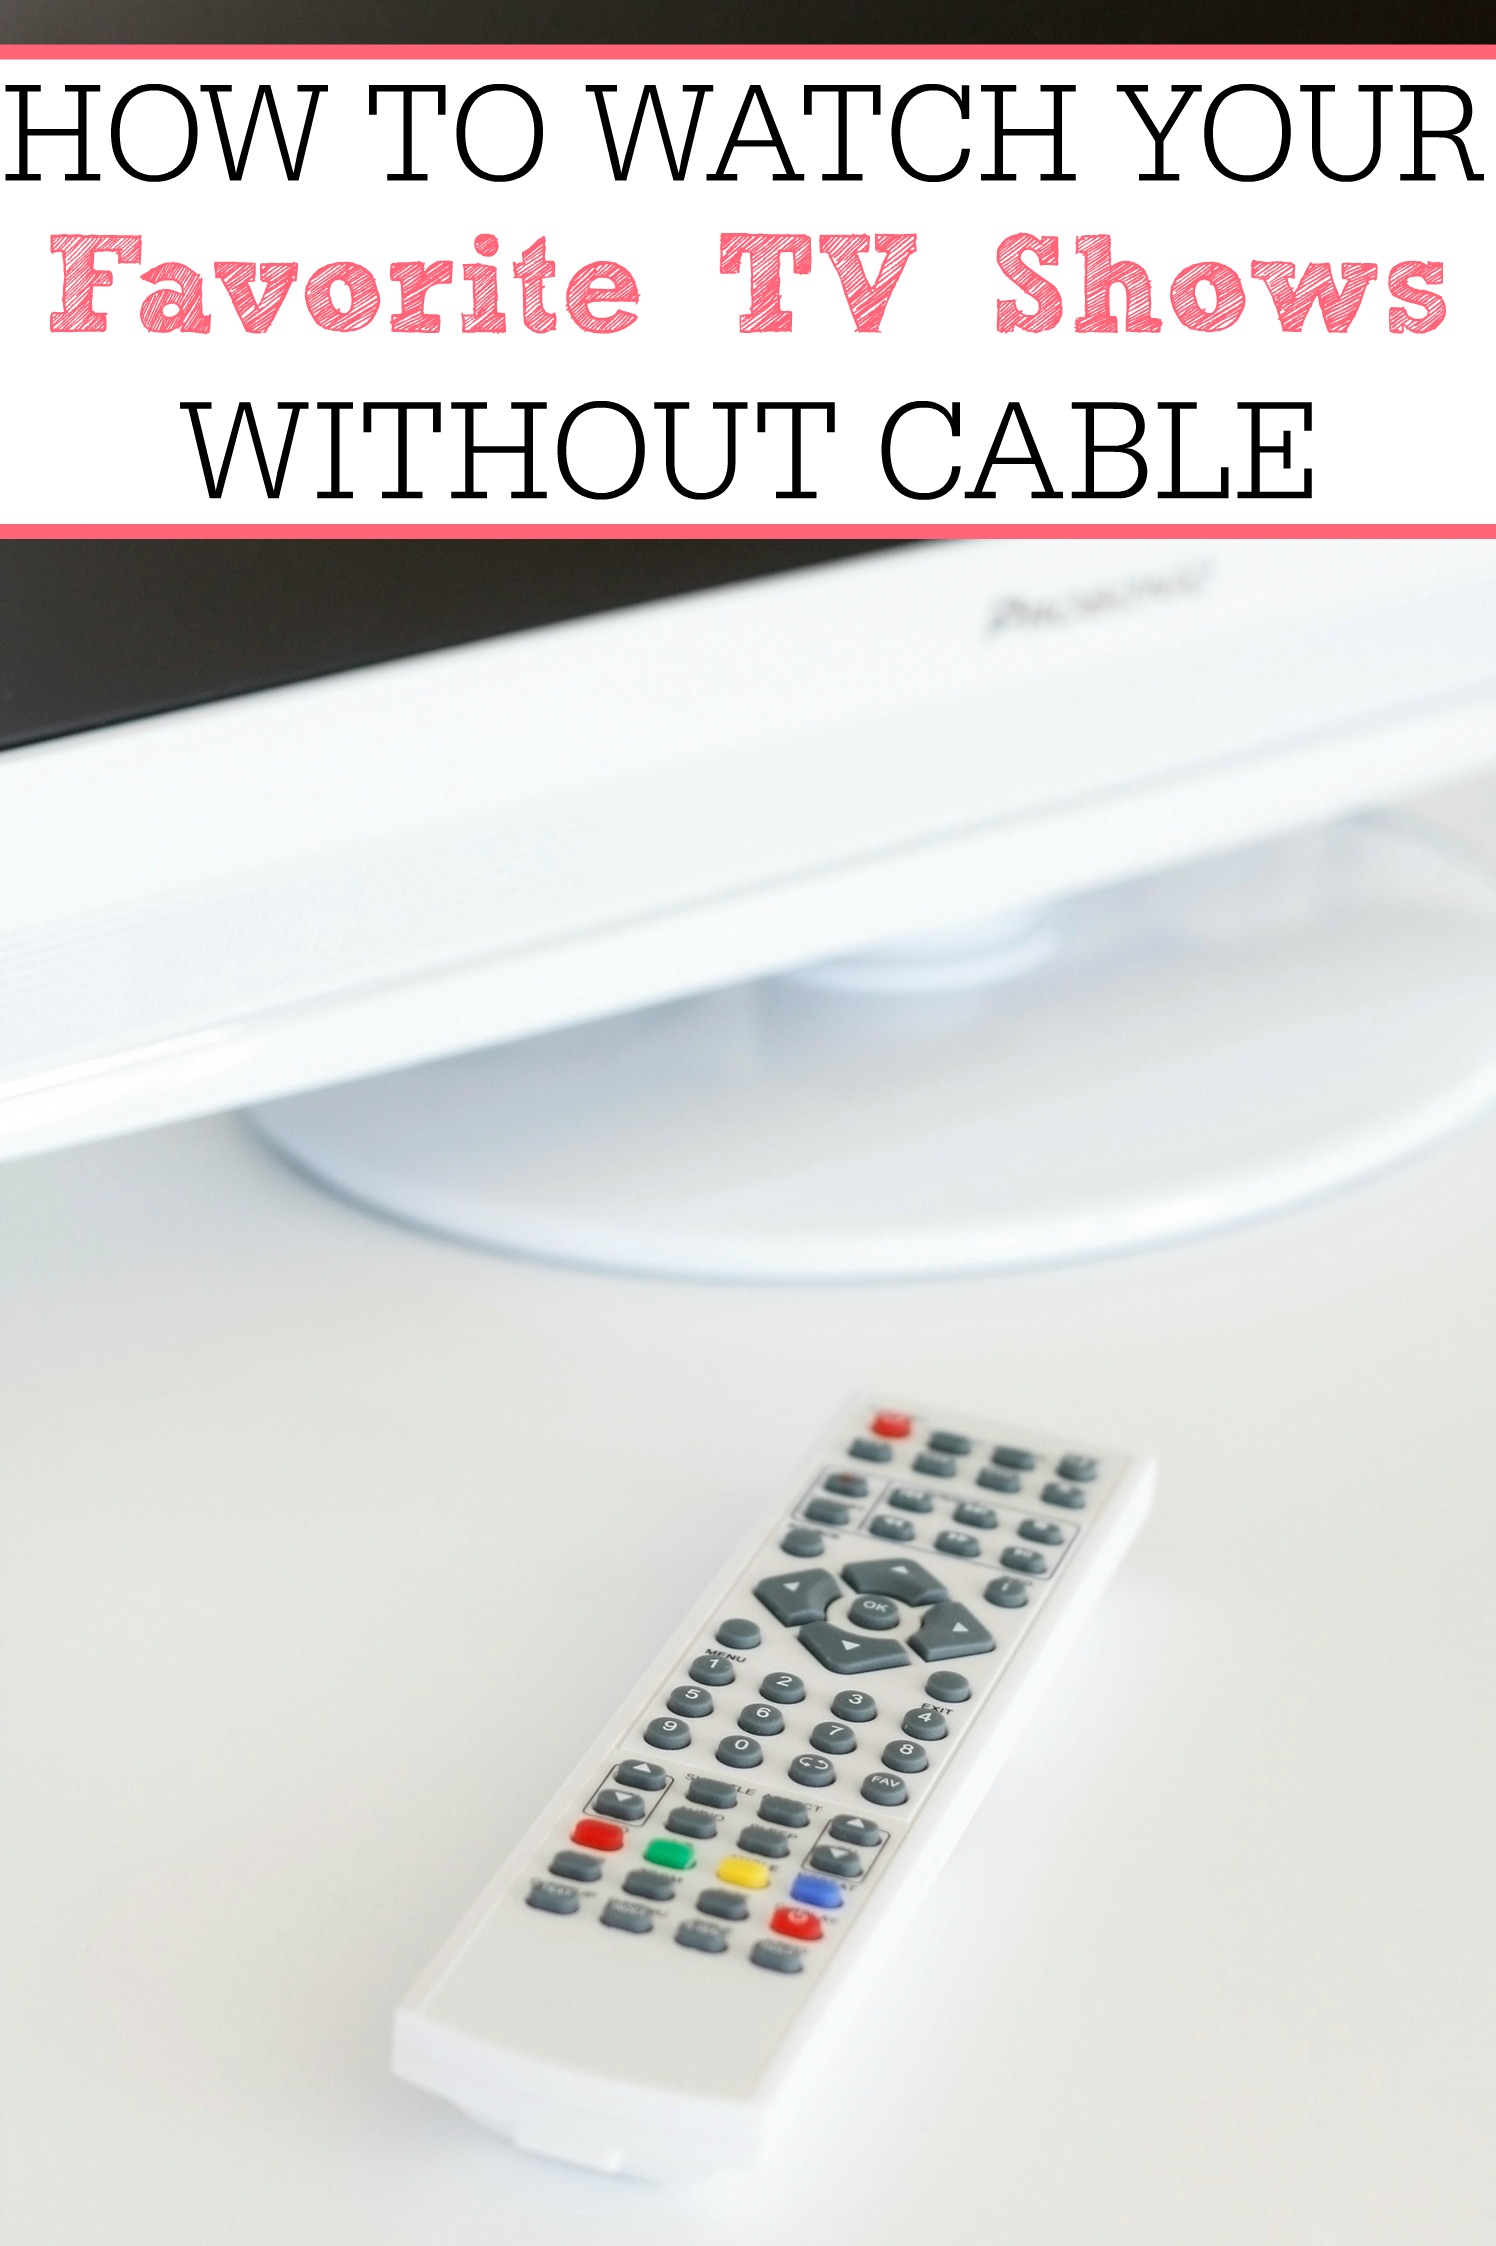 How to watch your favorite tv shows without cable